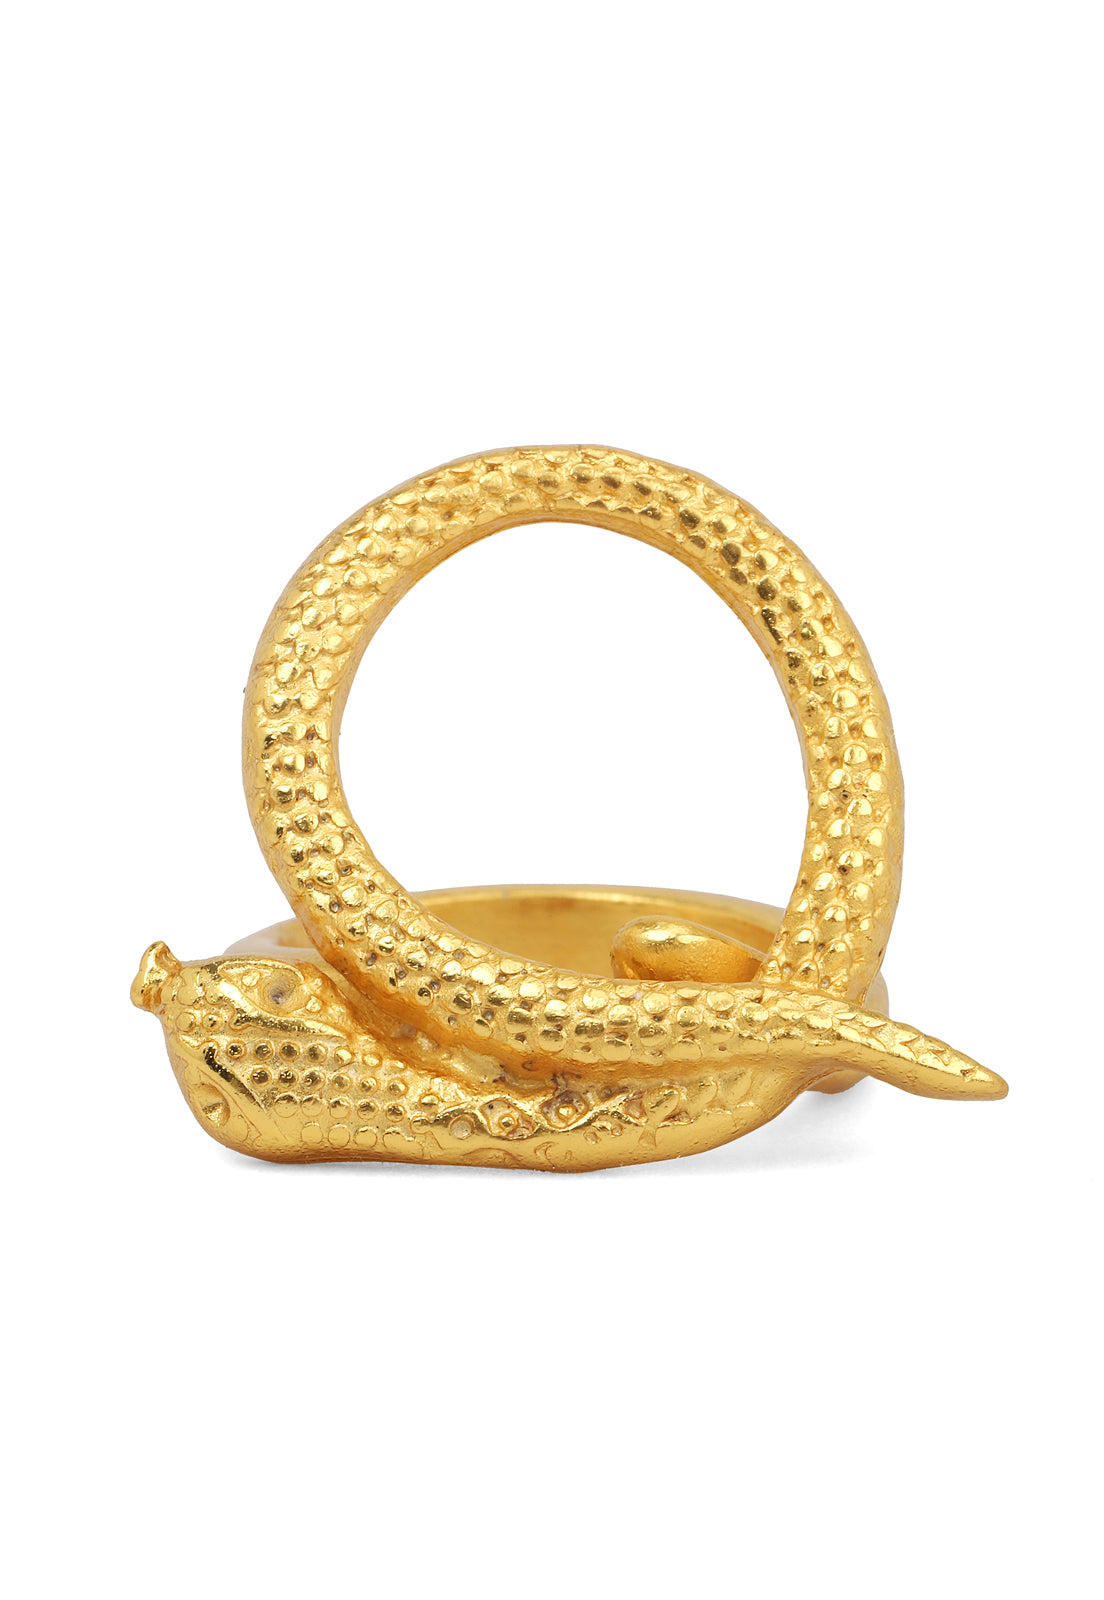 Cscabel Ring